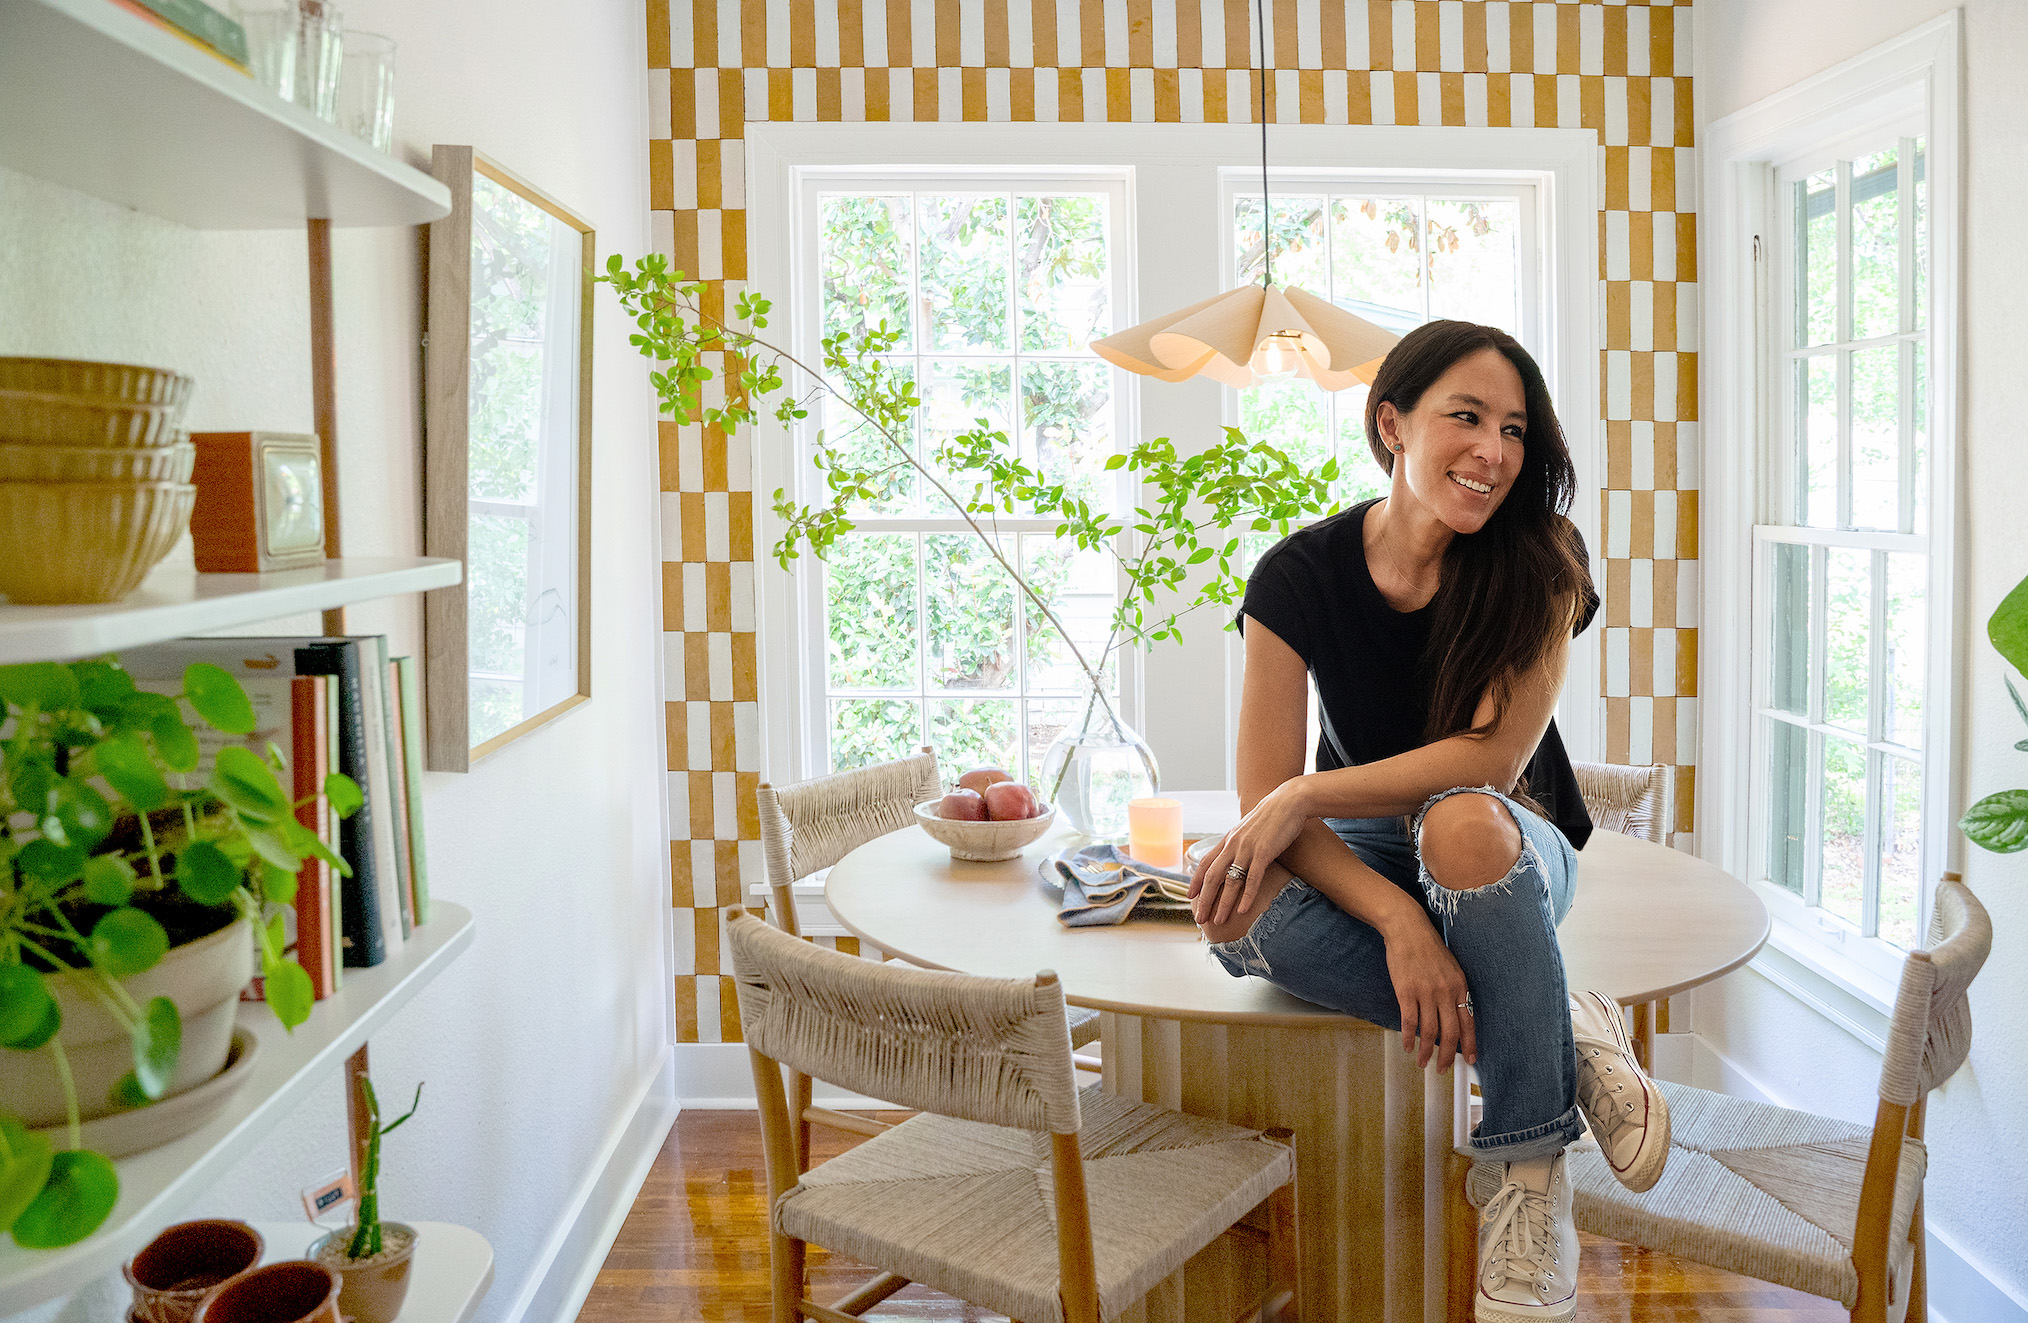 joanna gaines strips it down for quick & simple design in ‘mini reindeer’ trailer (video)